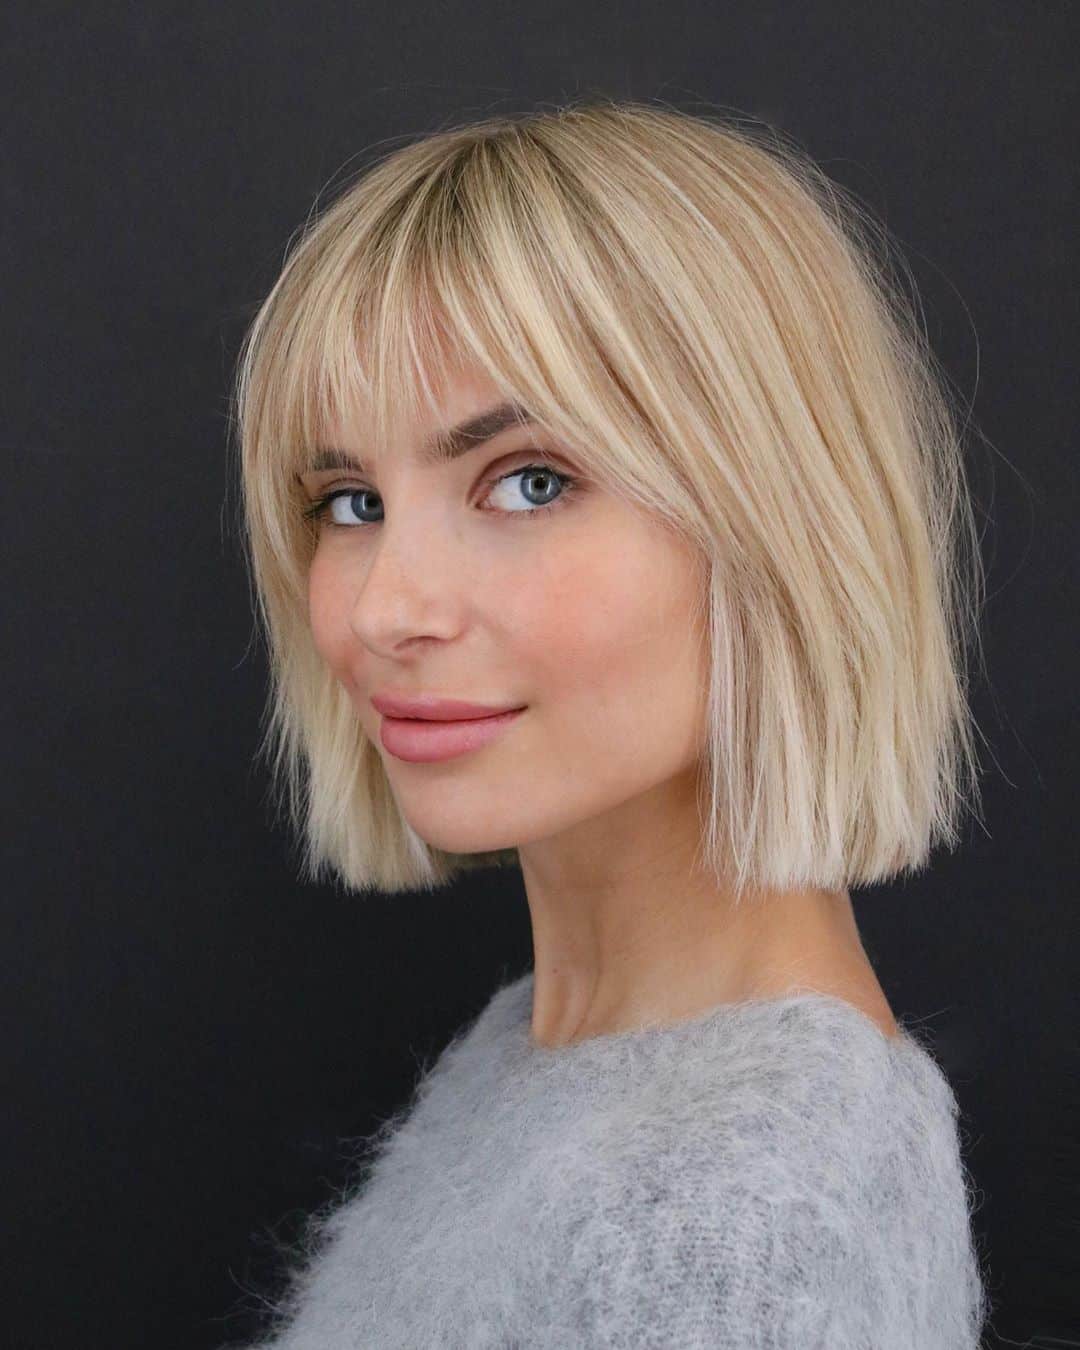 20 Best Short Hair with Bangs Hairstyle Ideas